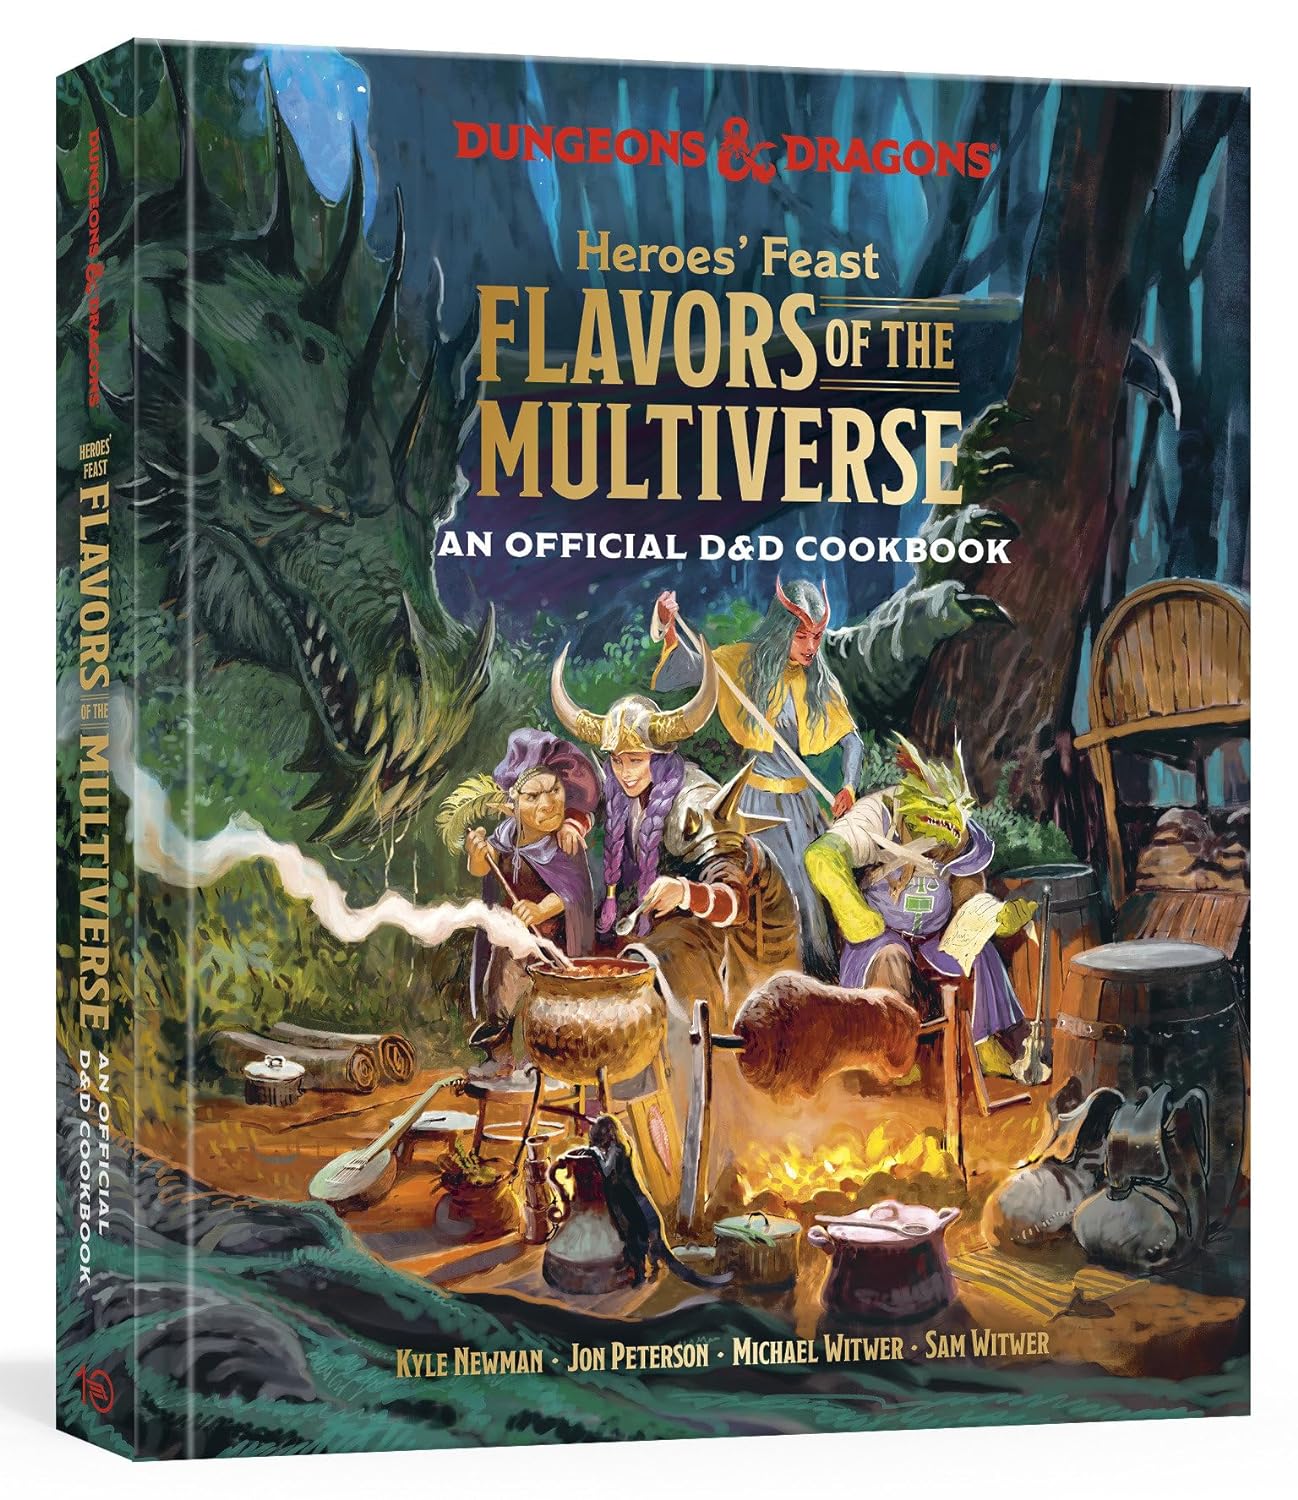 Heroes\' Feast Flavors of the Multiverse | Kyle Newman, Jon Peterson, Sam Witwer, Michael Witwer